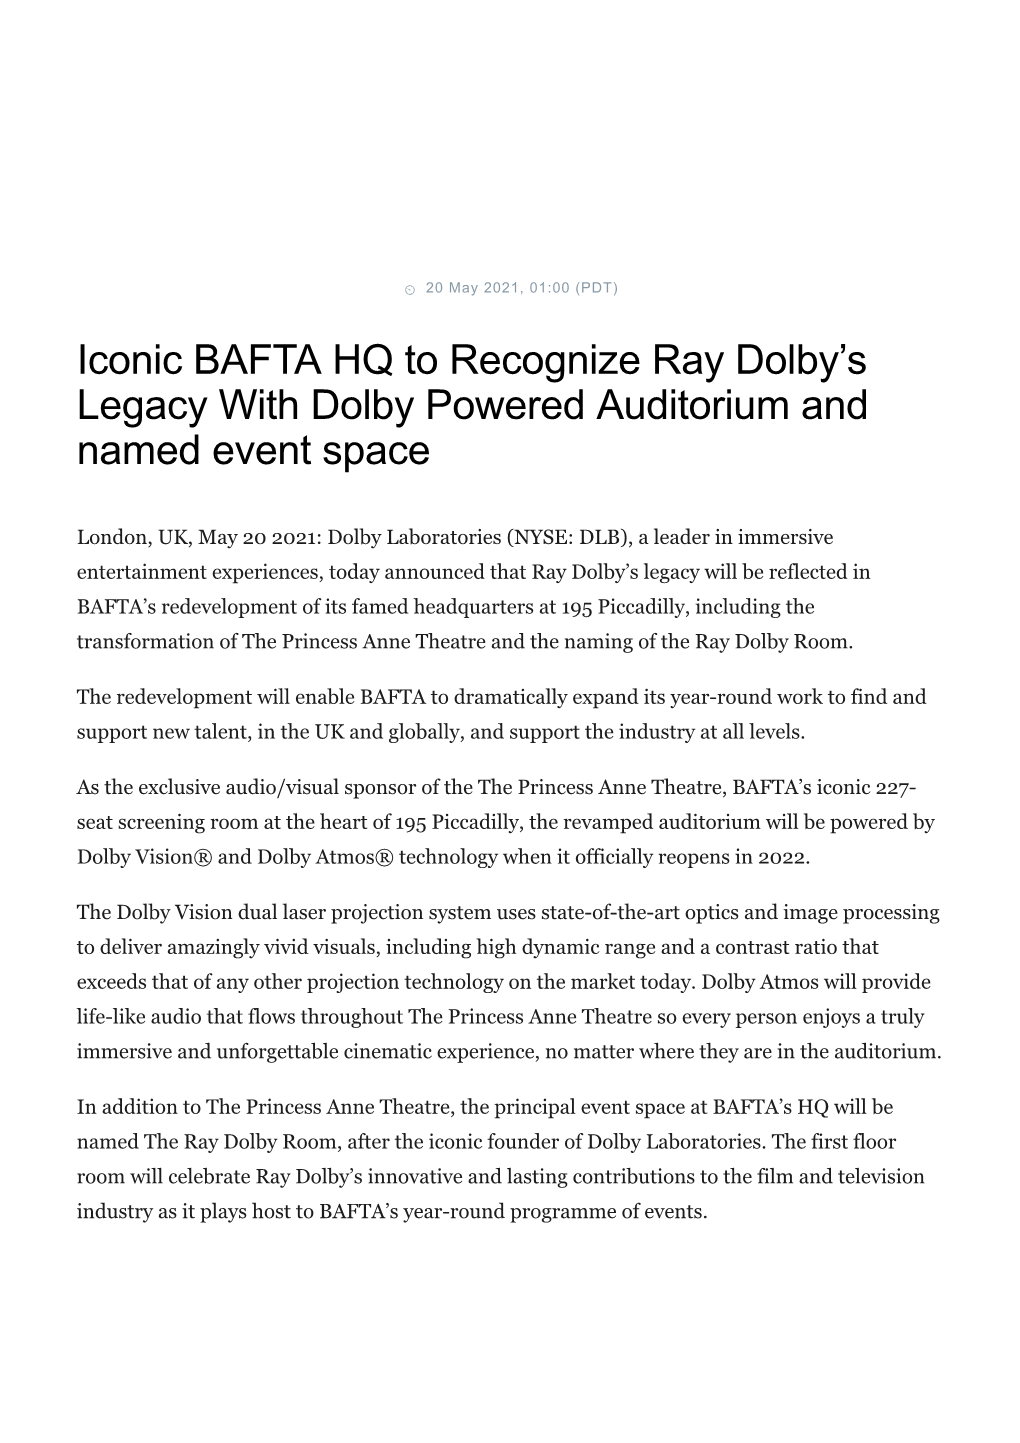 Iconic BAFTA HQ to Recognize Ray Dolby's Legacy With